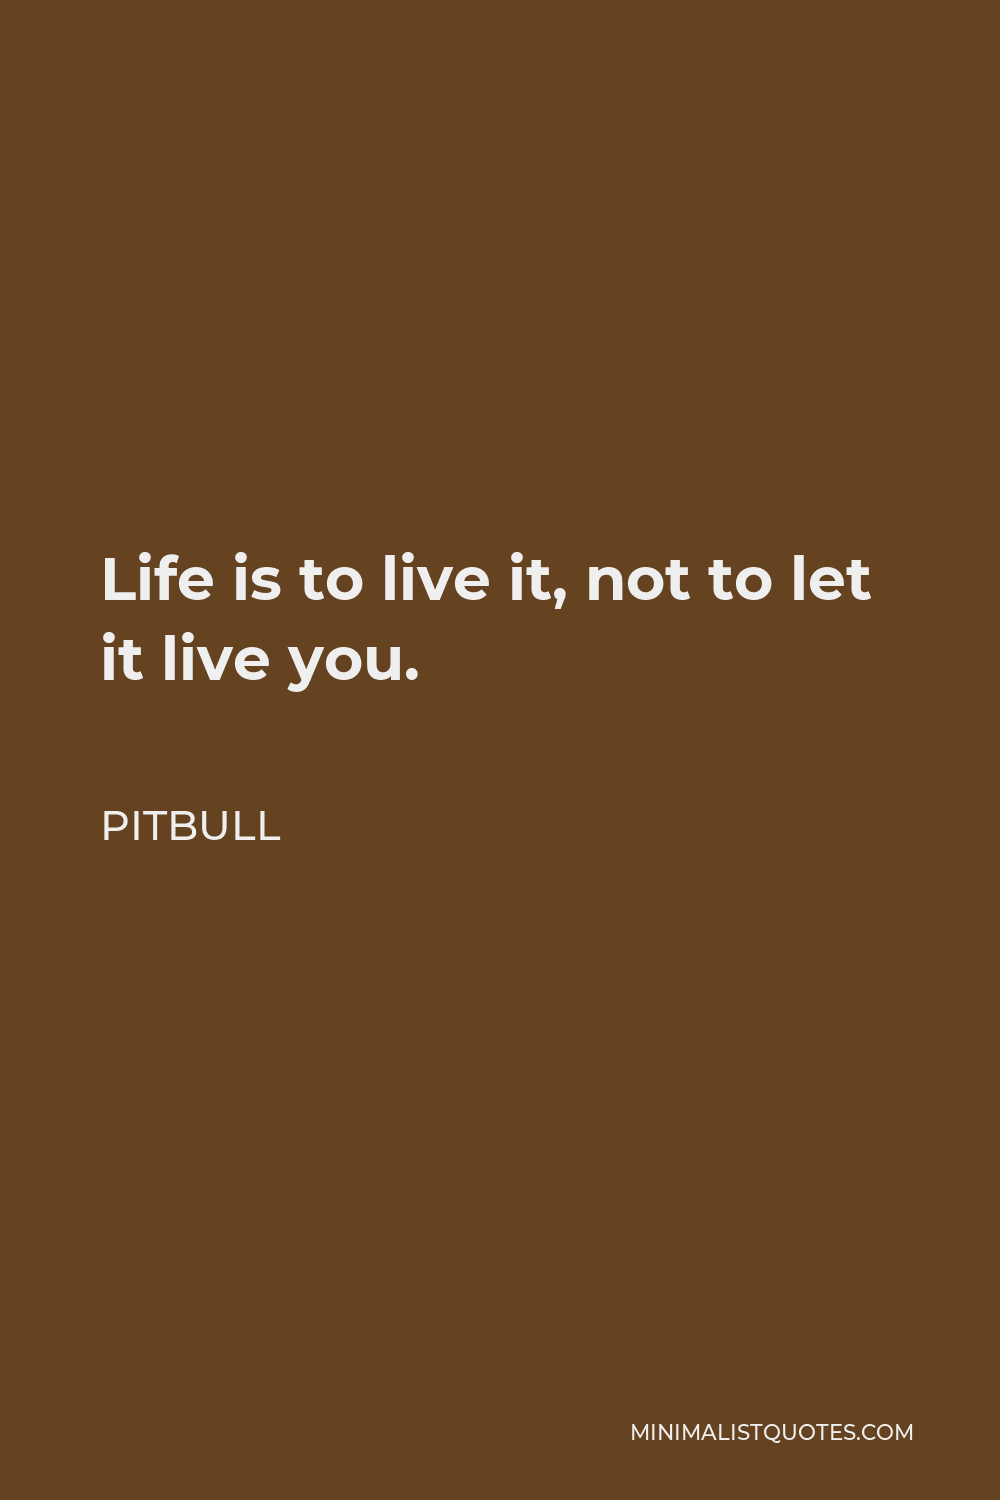 Pitbull Quote - Life is to live it, not to let it live you.